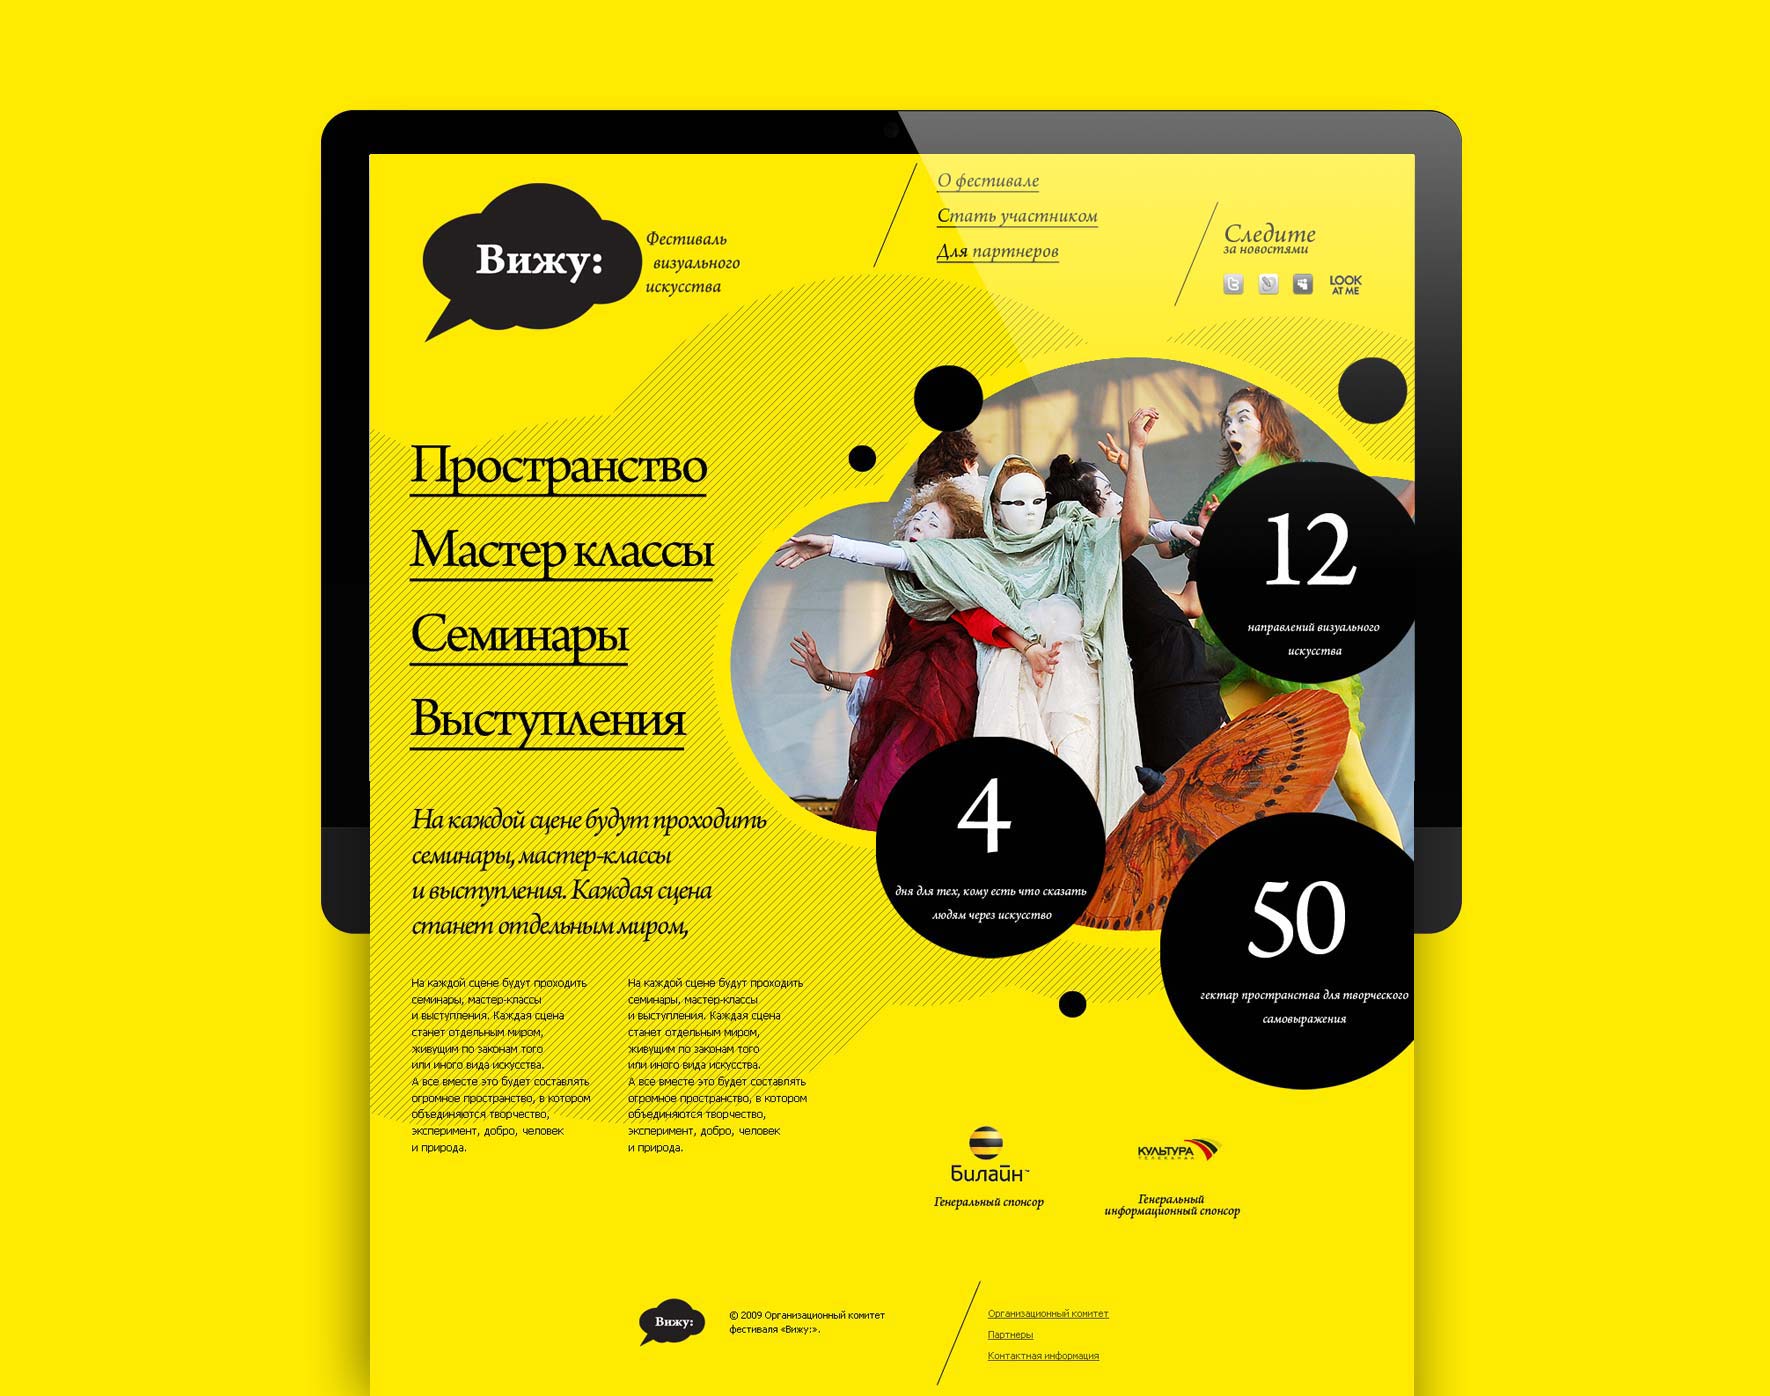 web design for the event